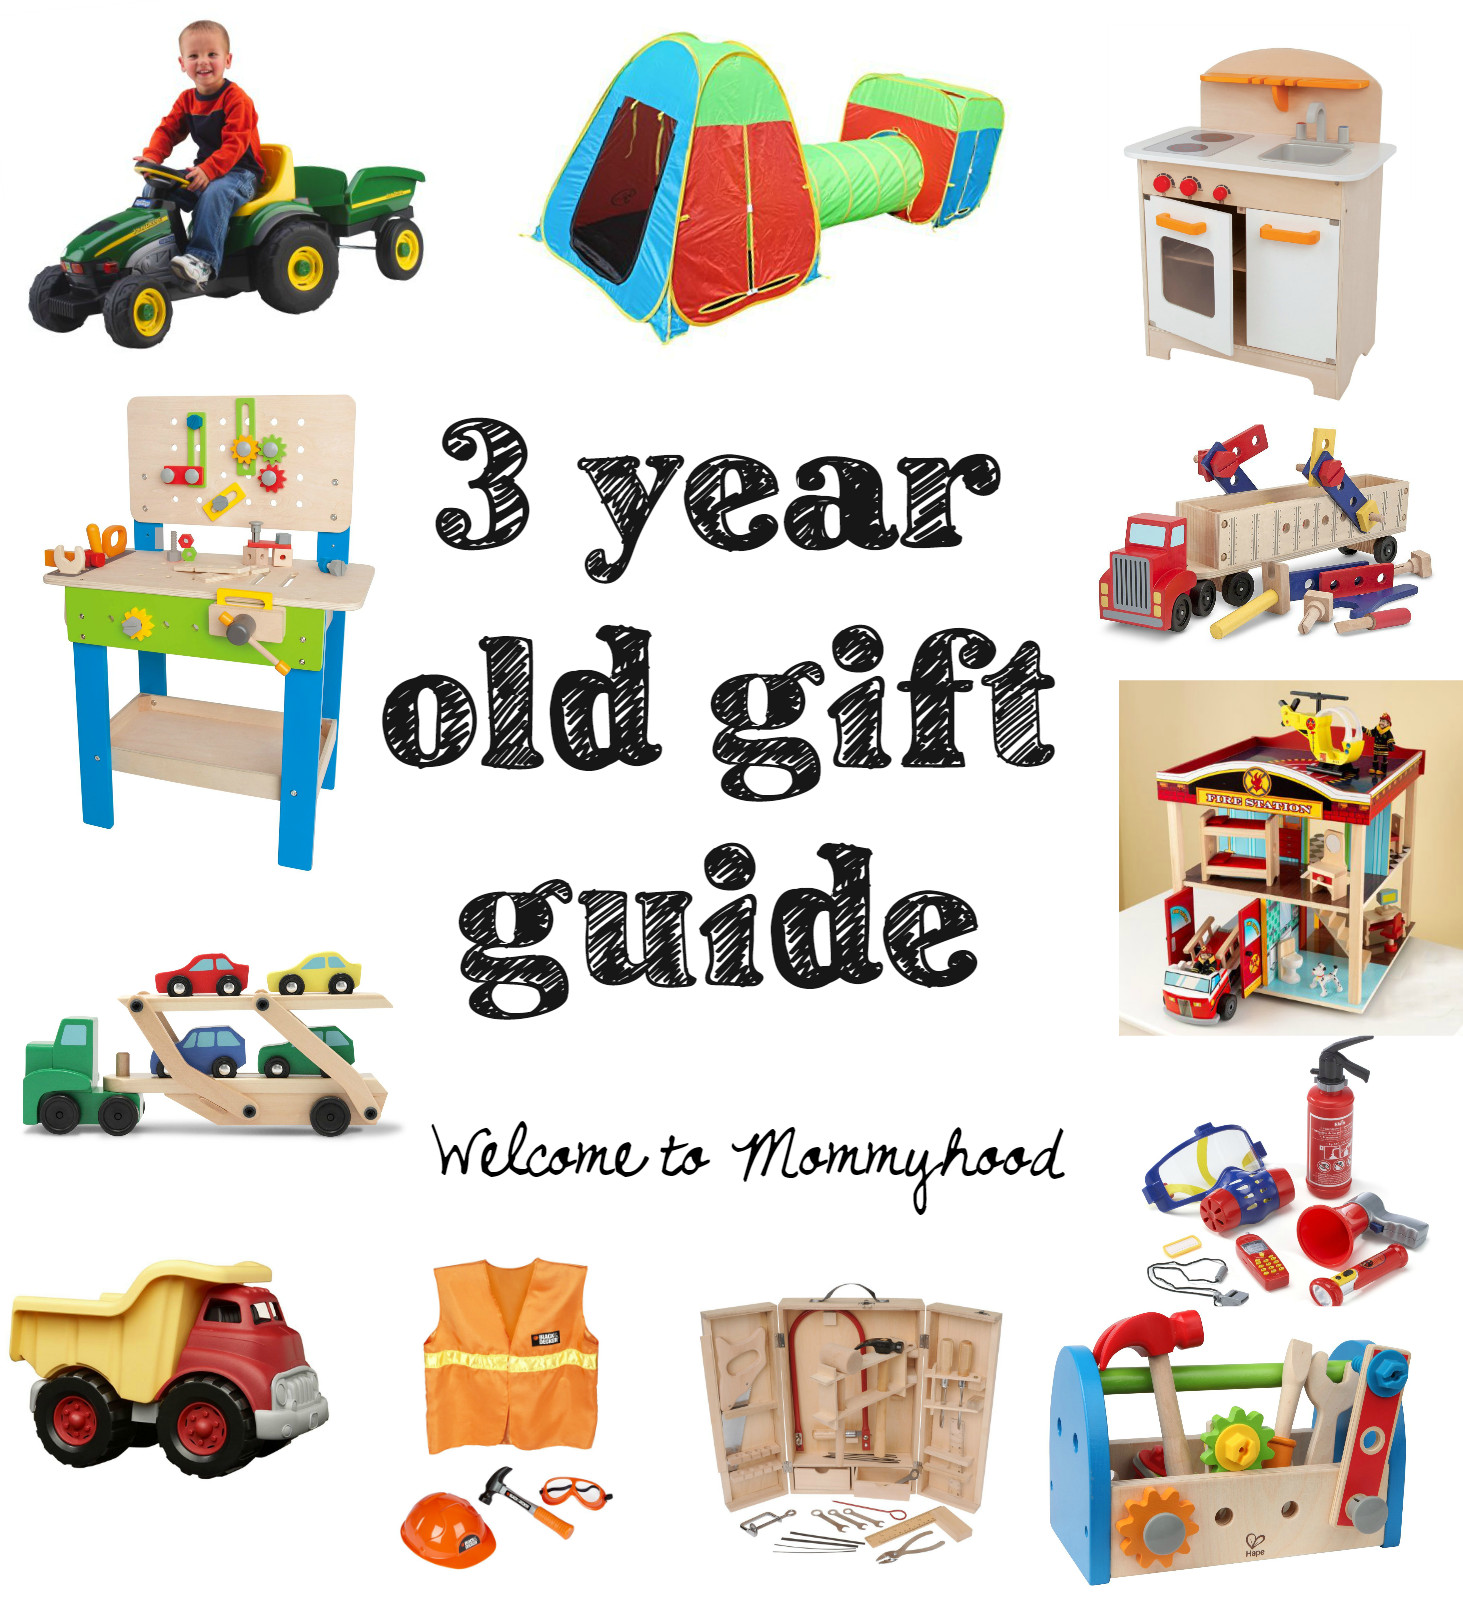 3 Year Old Boy Birthday Gift Ideas
 Gift guide for three year old boys from Wel e to